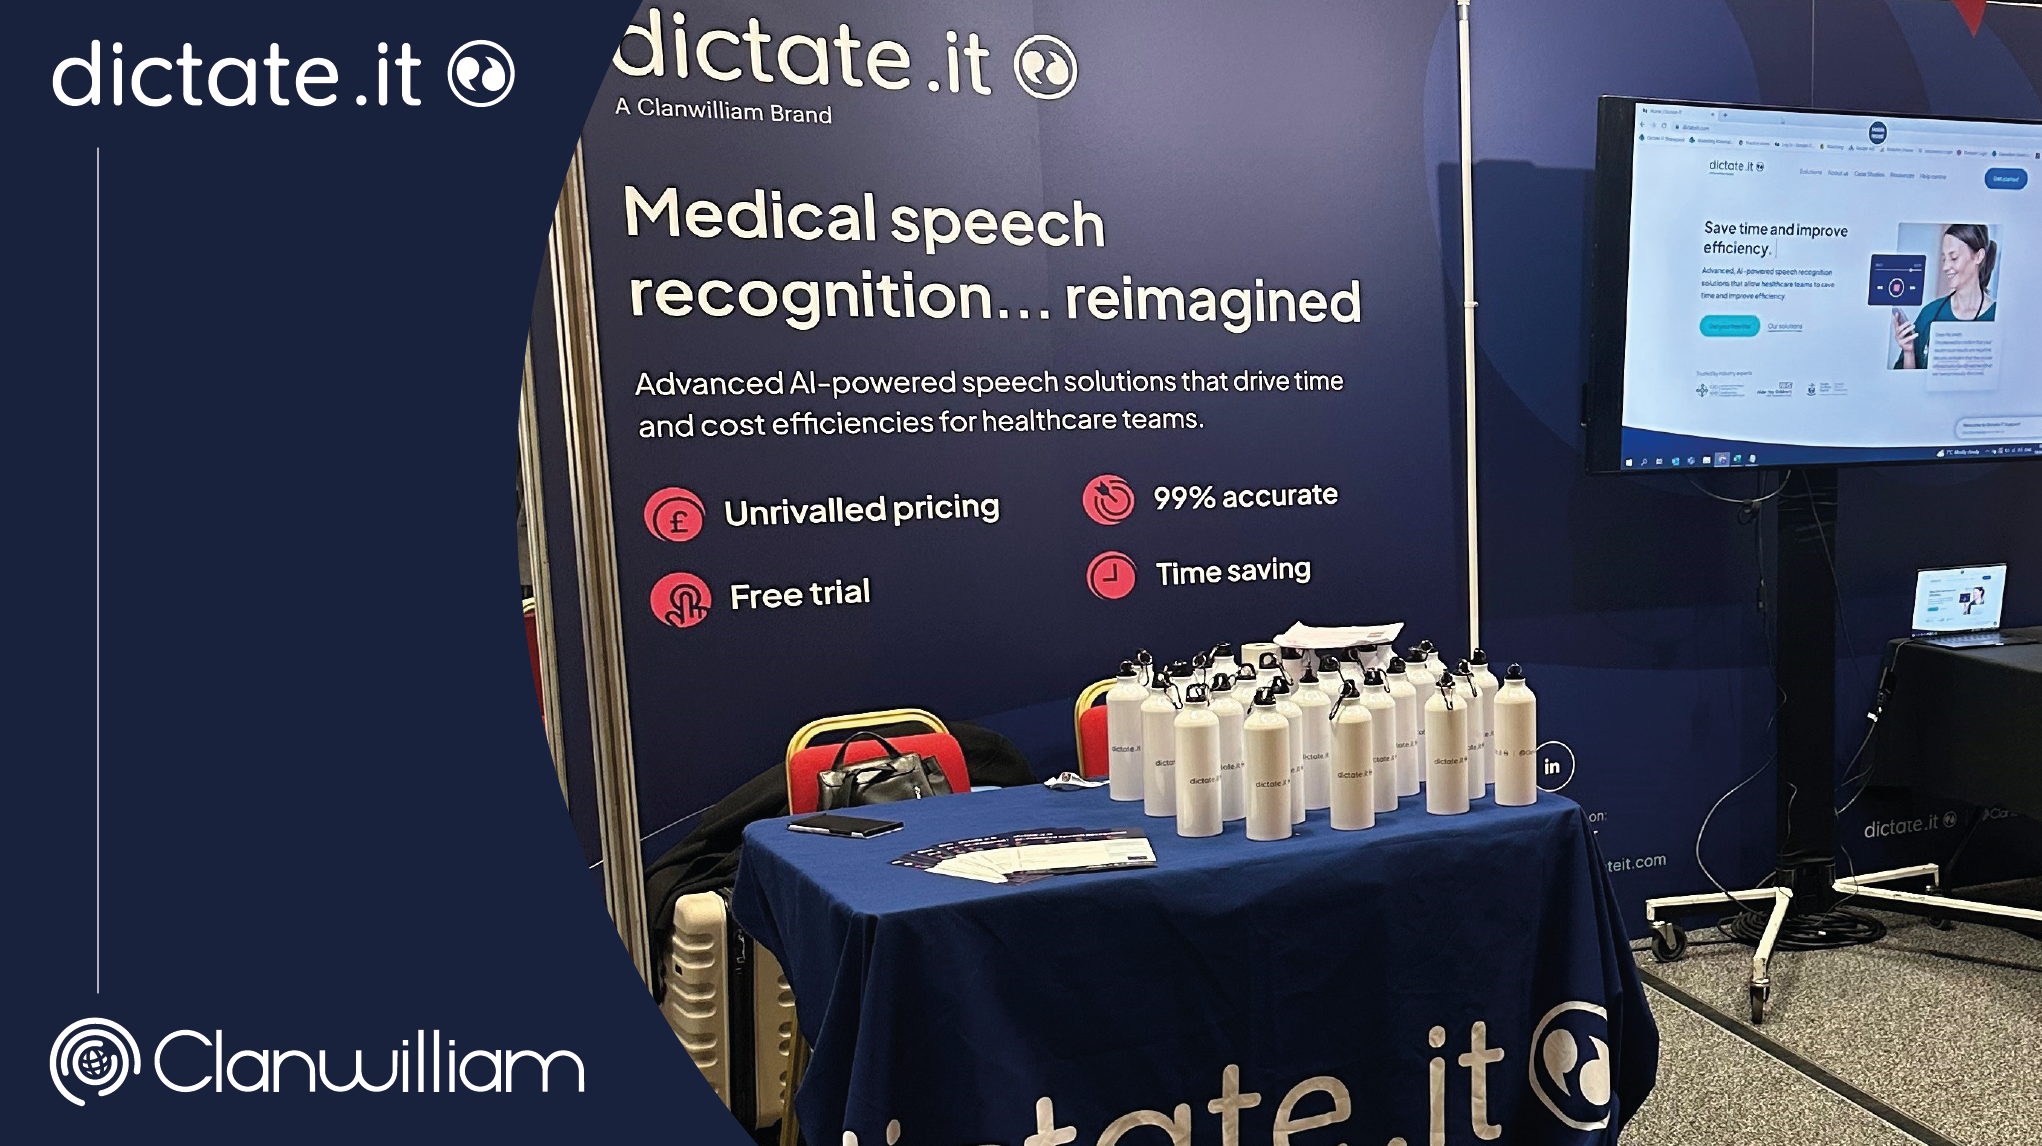 Dictate.IT's stand at P4H Scotland, featuring a branded tablecloth in blue, a large TV screen and navy blue and pink graphics